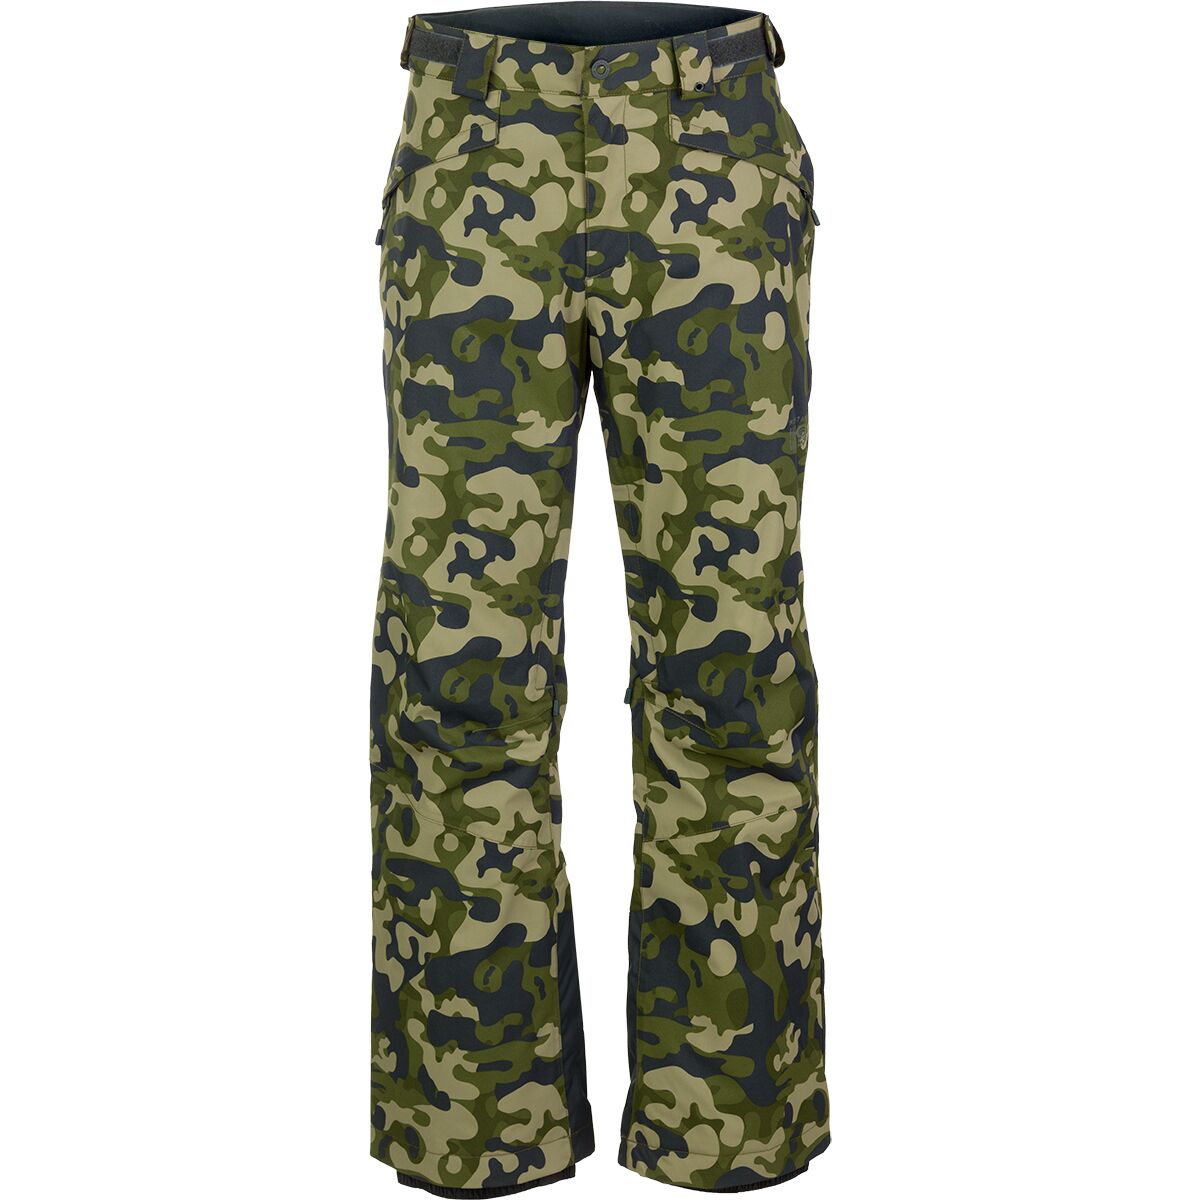 Firefall 2 Insulated Pant - Men